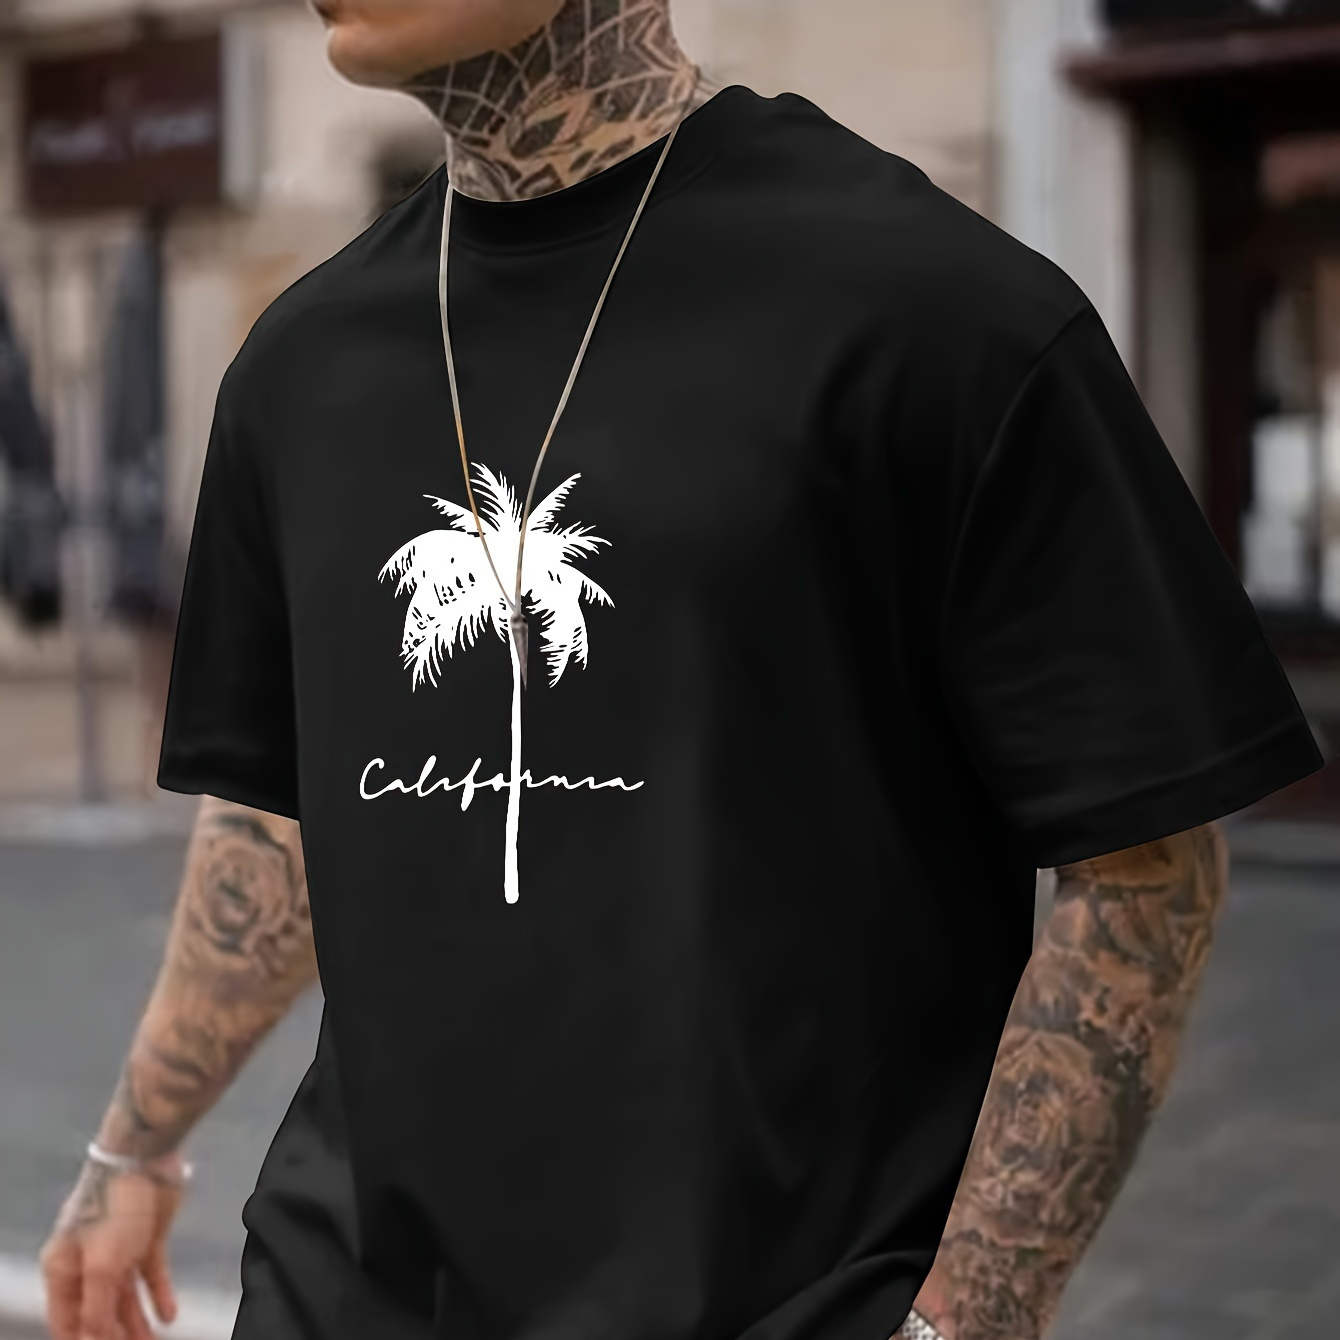 

Coconut Tree Stylish Print Summer & Spring Tee For Men, Casual Short Sleeve Fashion Style T-shirt, Sporty New Arrival Novelty Top For Leisure